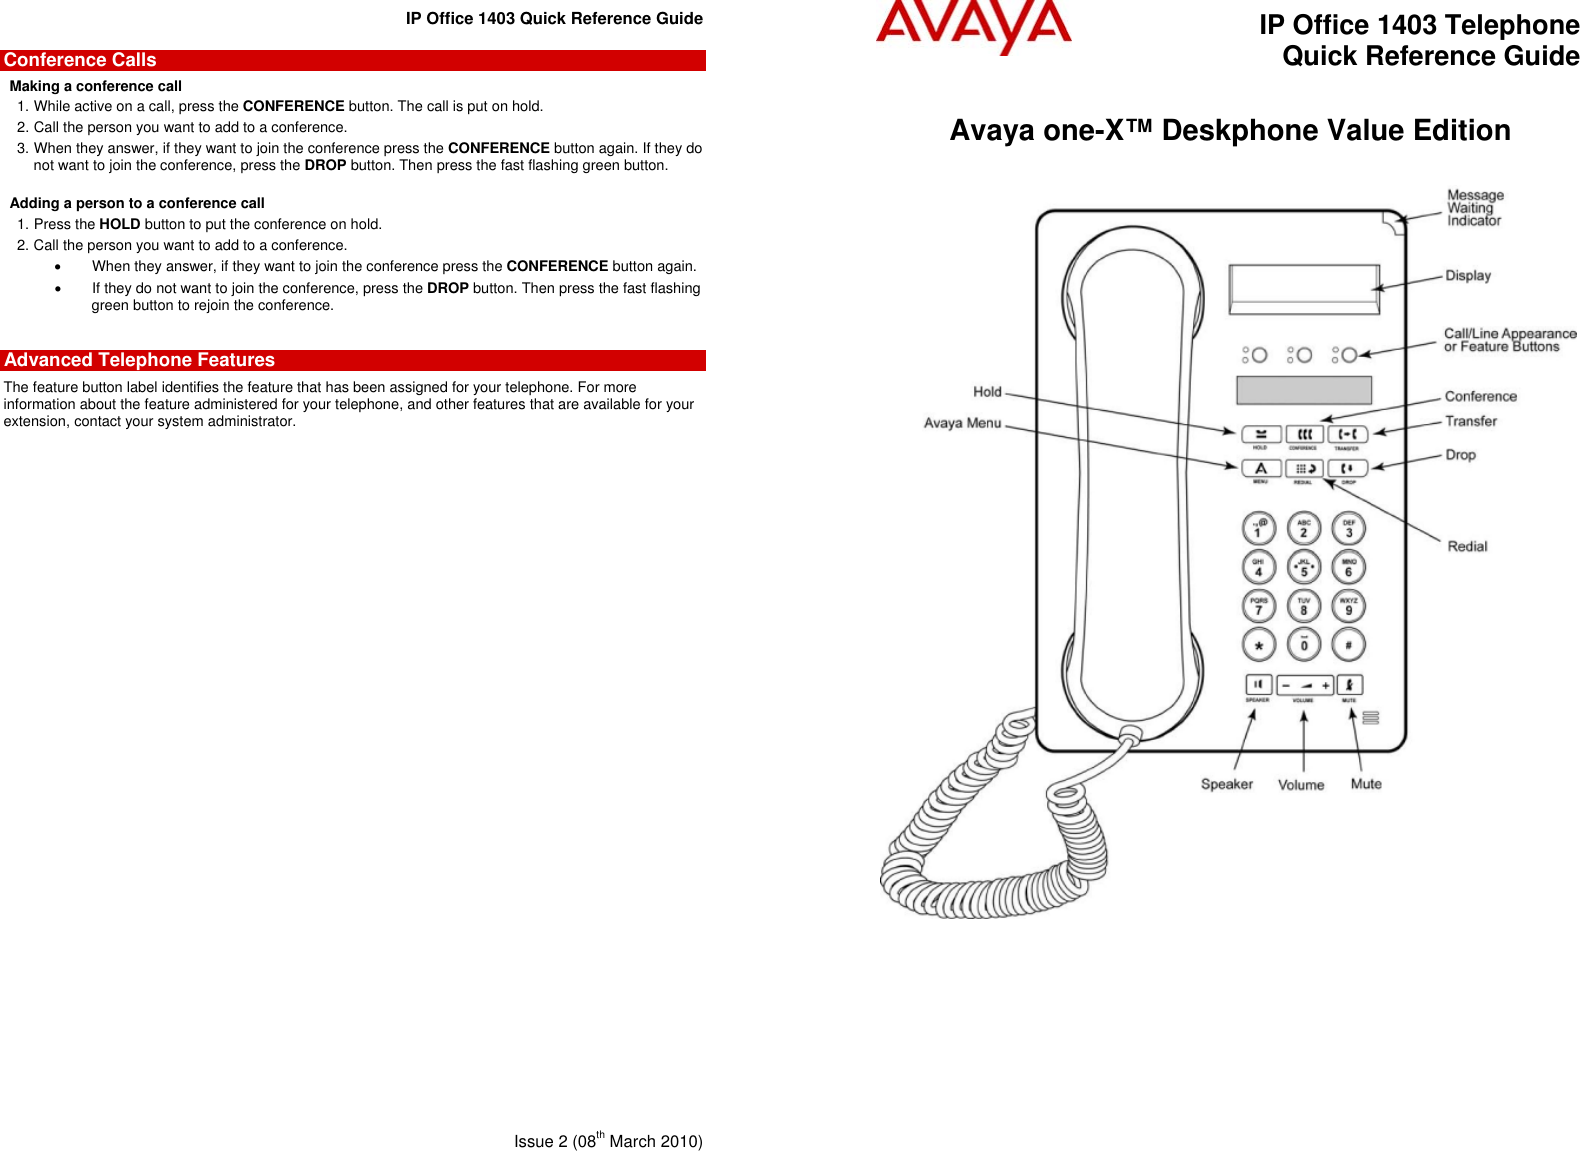 Avaya Ip Office 1403 Quick Reference Guide 1603